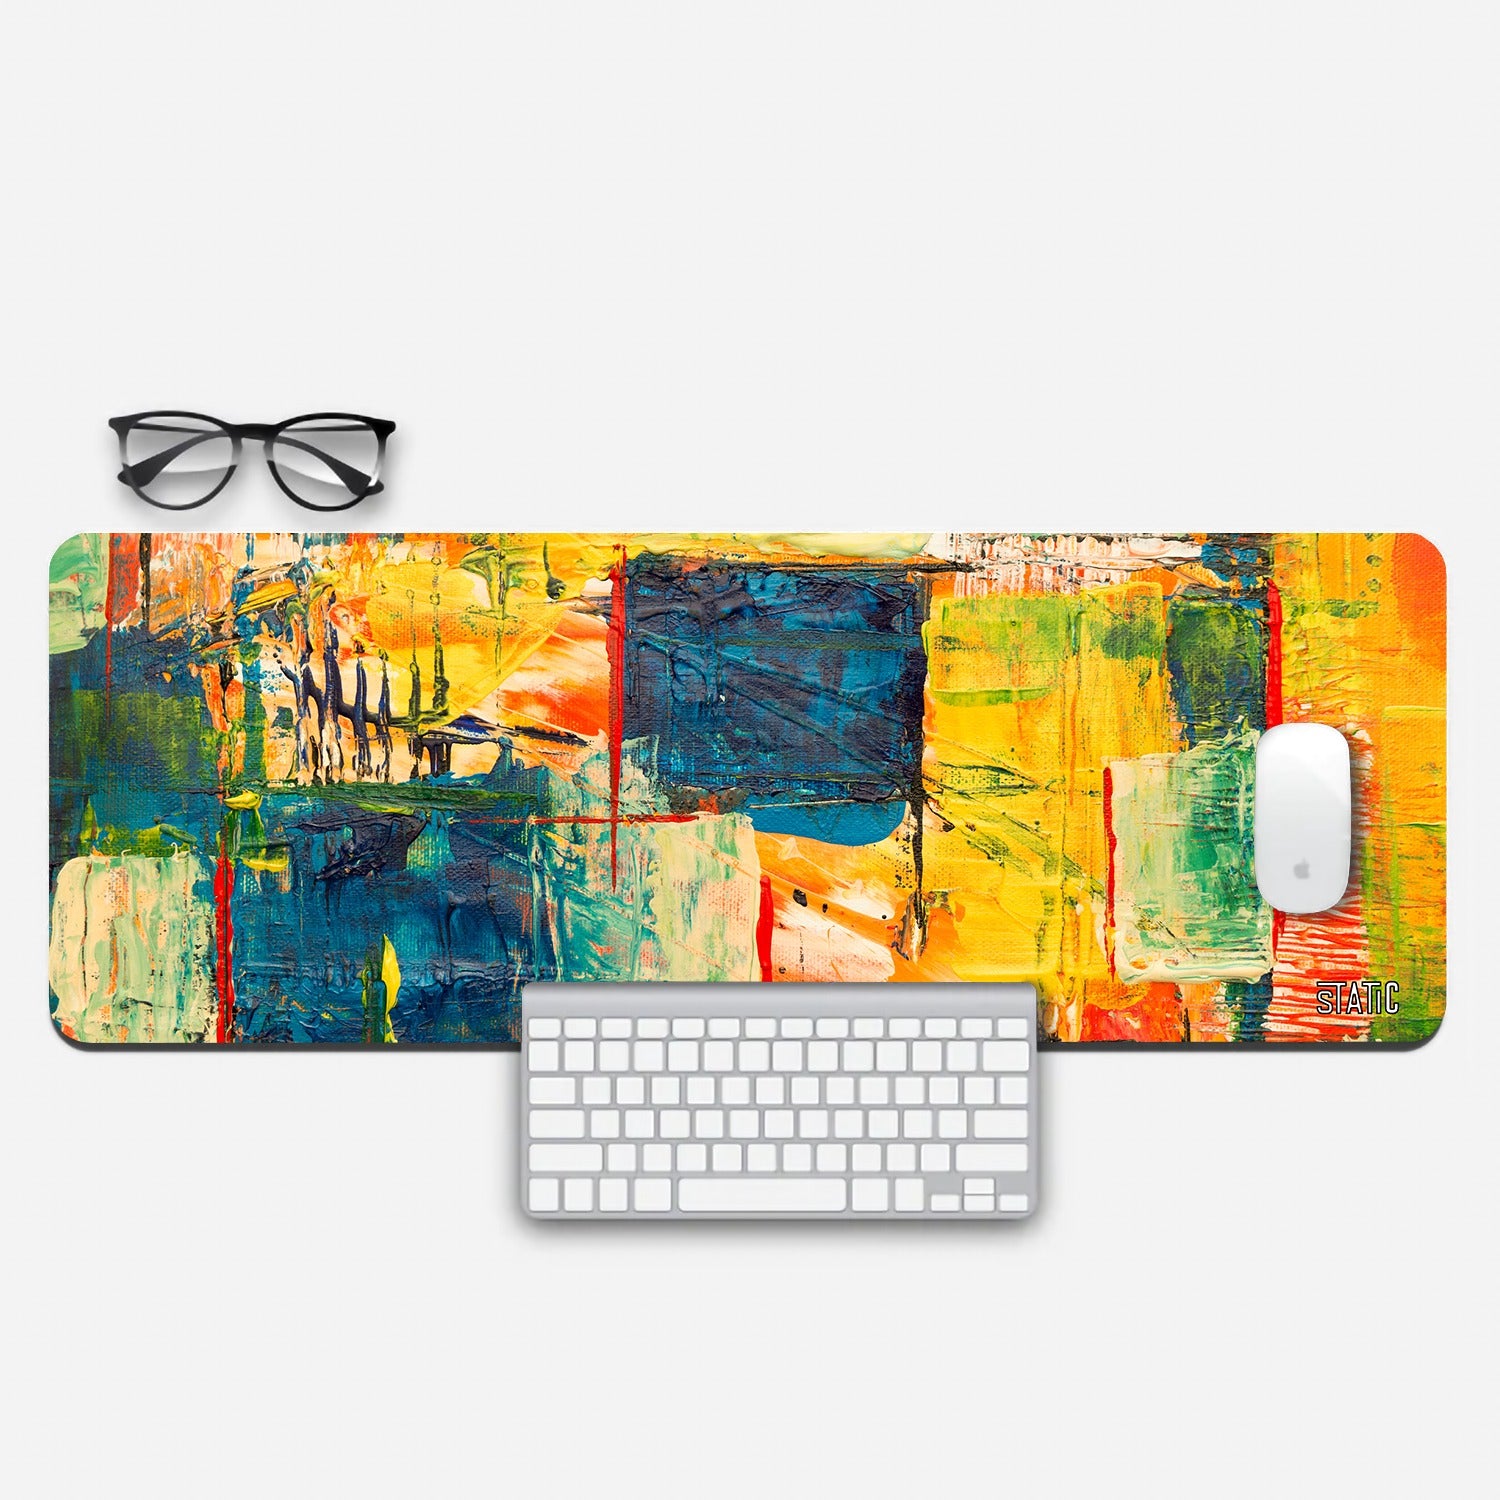 Elevate your gaming setup with our Extended Gaming Mouse Pad, featuring a captivating modern art acrylic painting. Bright yellow and rich red ochre shades arranged in near-square shapes with dark blue accents create a visually striking design. Not only does it enhance precision and control, but it also adds a touch of contemporary artistry to your desk. Upgrade your gaming experience with this fusion of functionality and aesthetics.